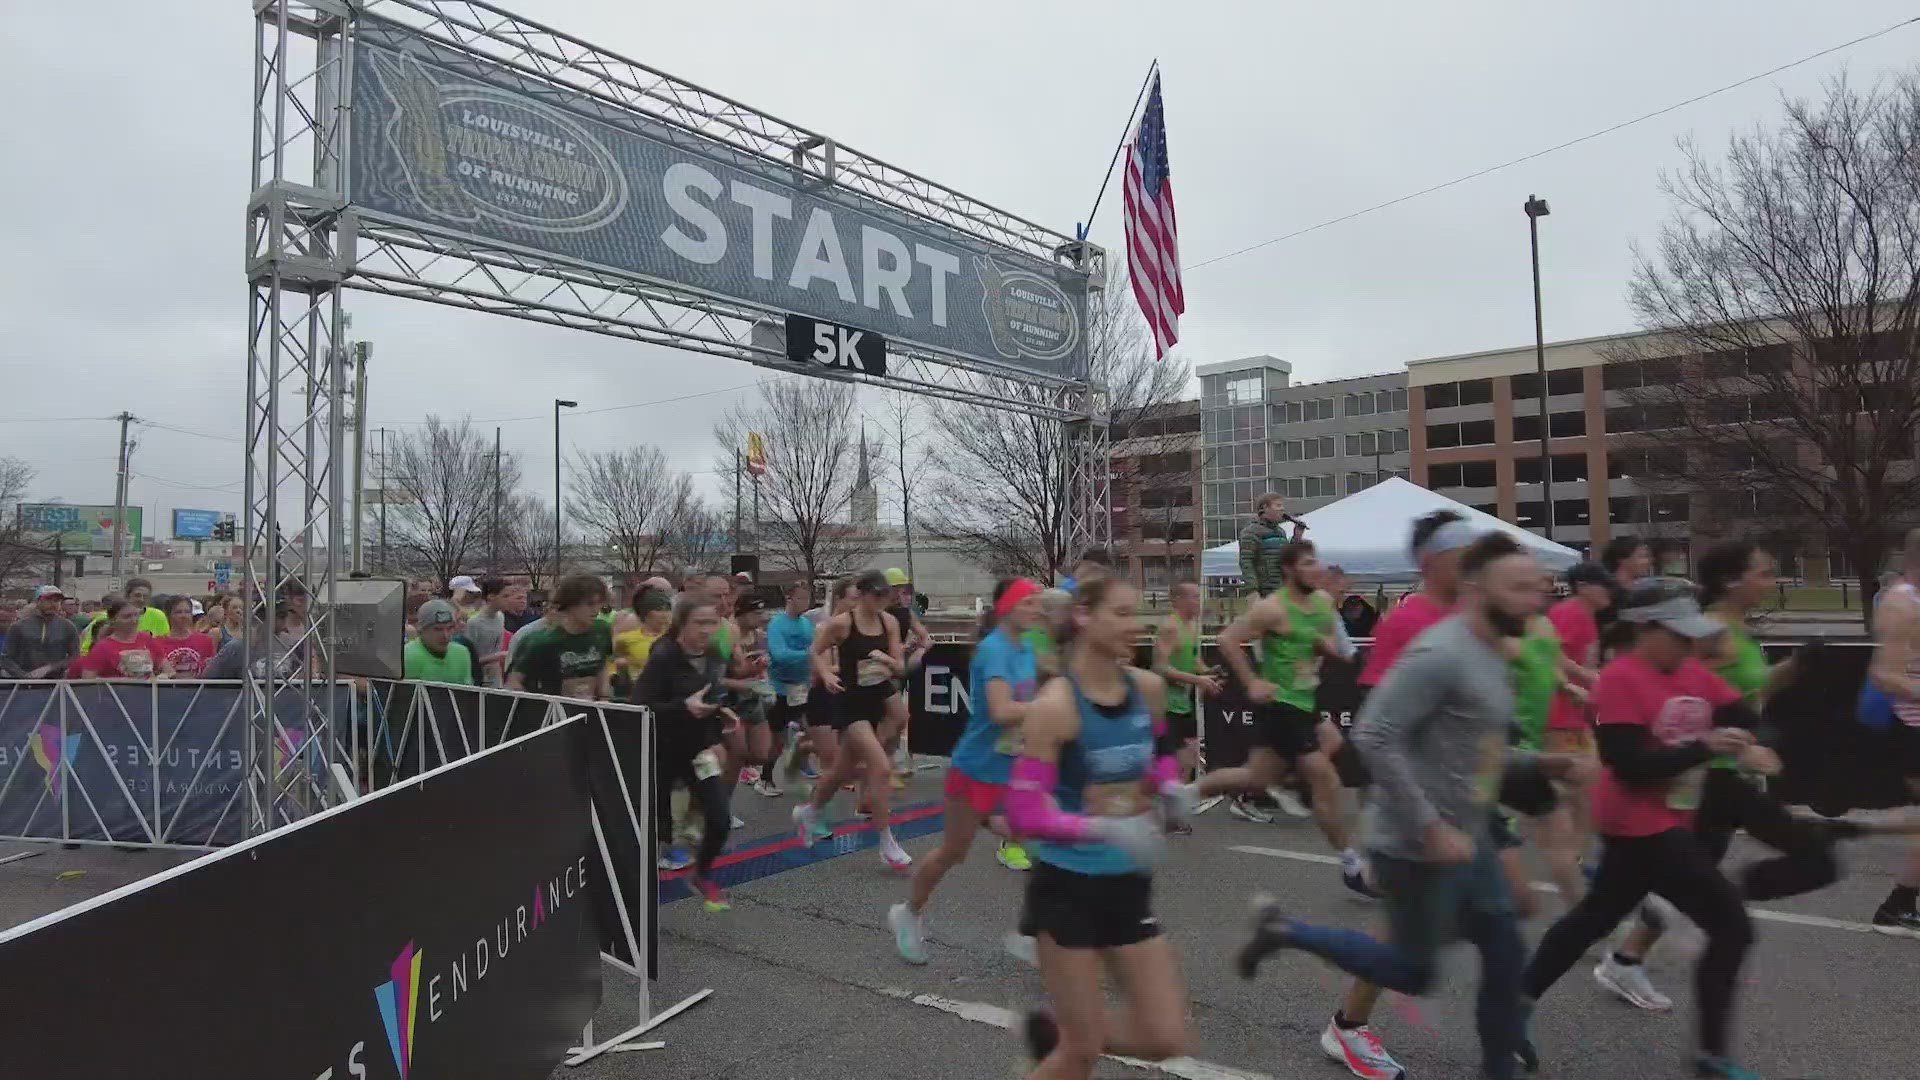 The Triple Crown of Running 10k is this weekend in Louisville. Here's what you need to know.